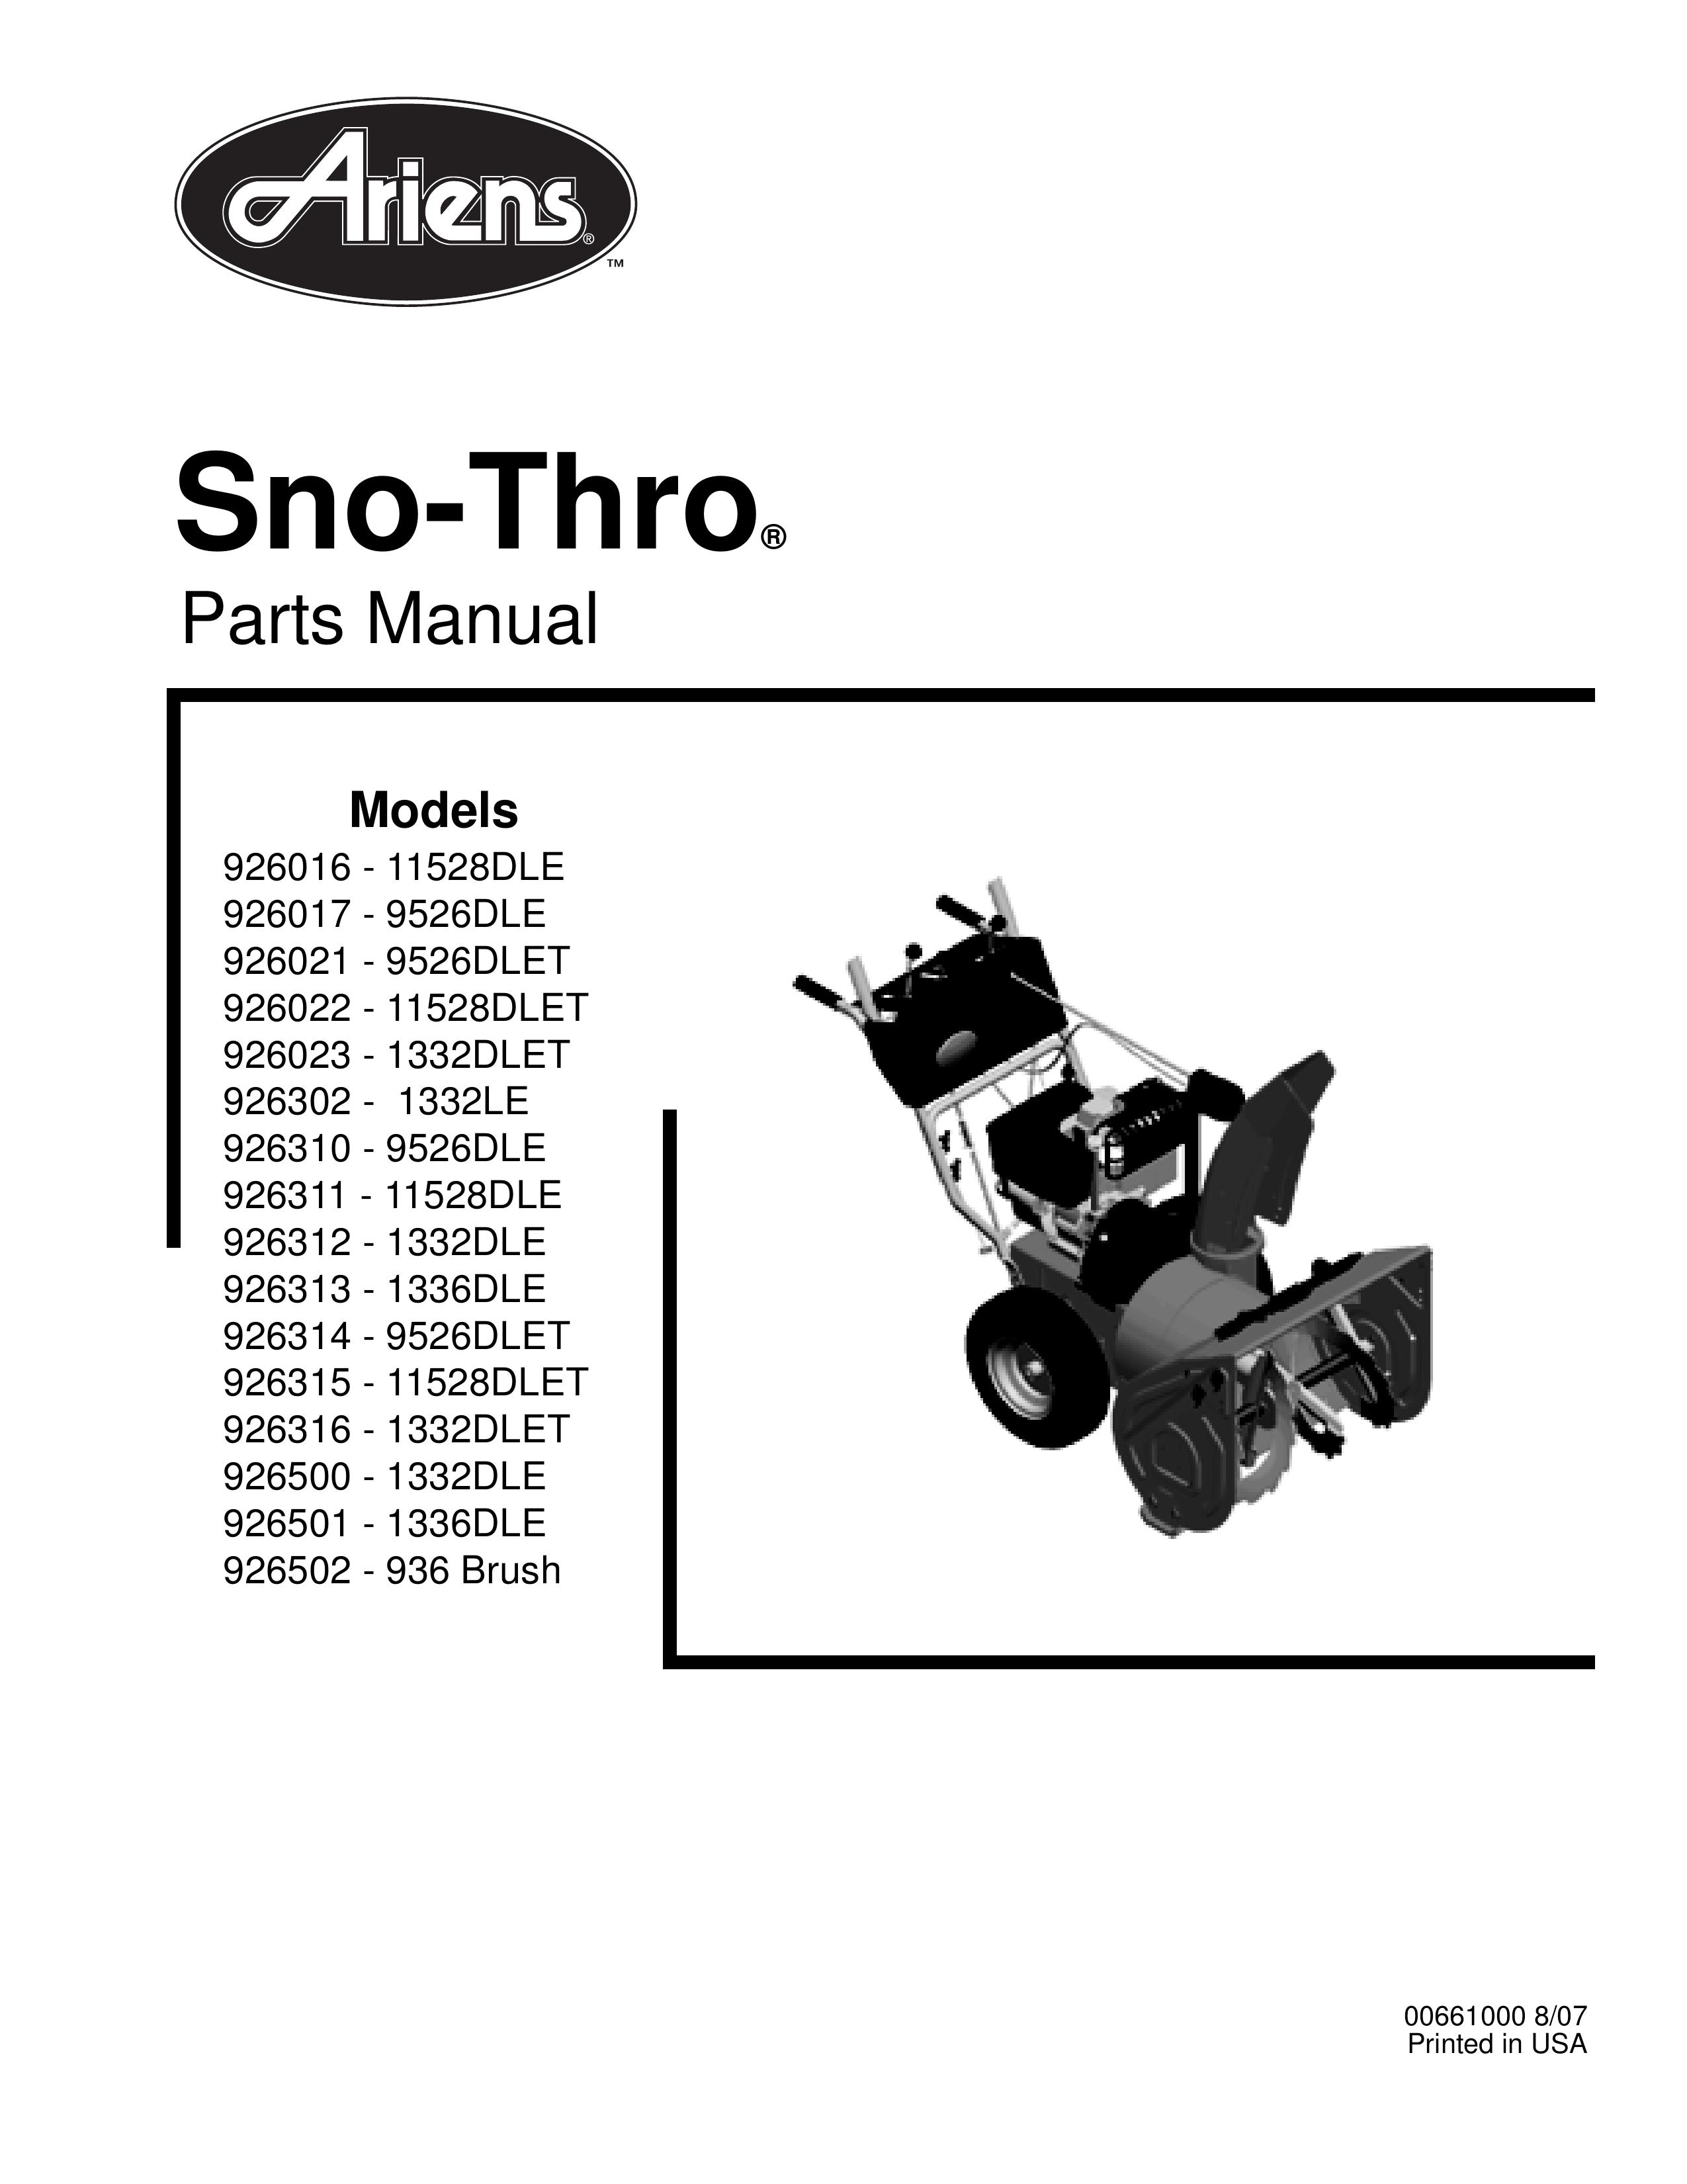 Ariens 926022 - 11528DLET Snow Blower Attachment User Manual